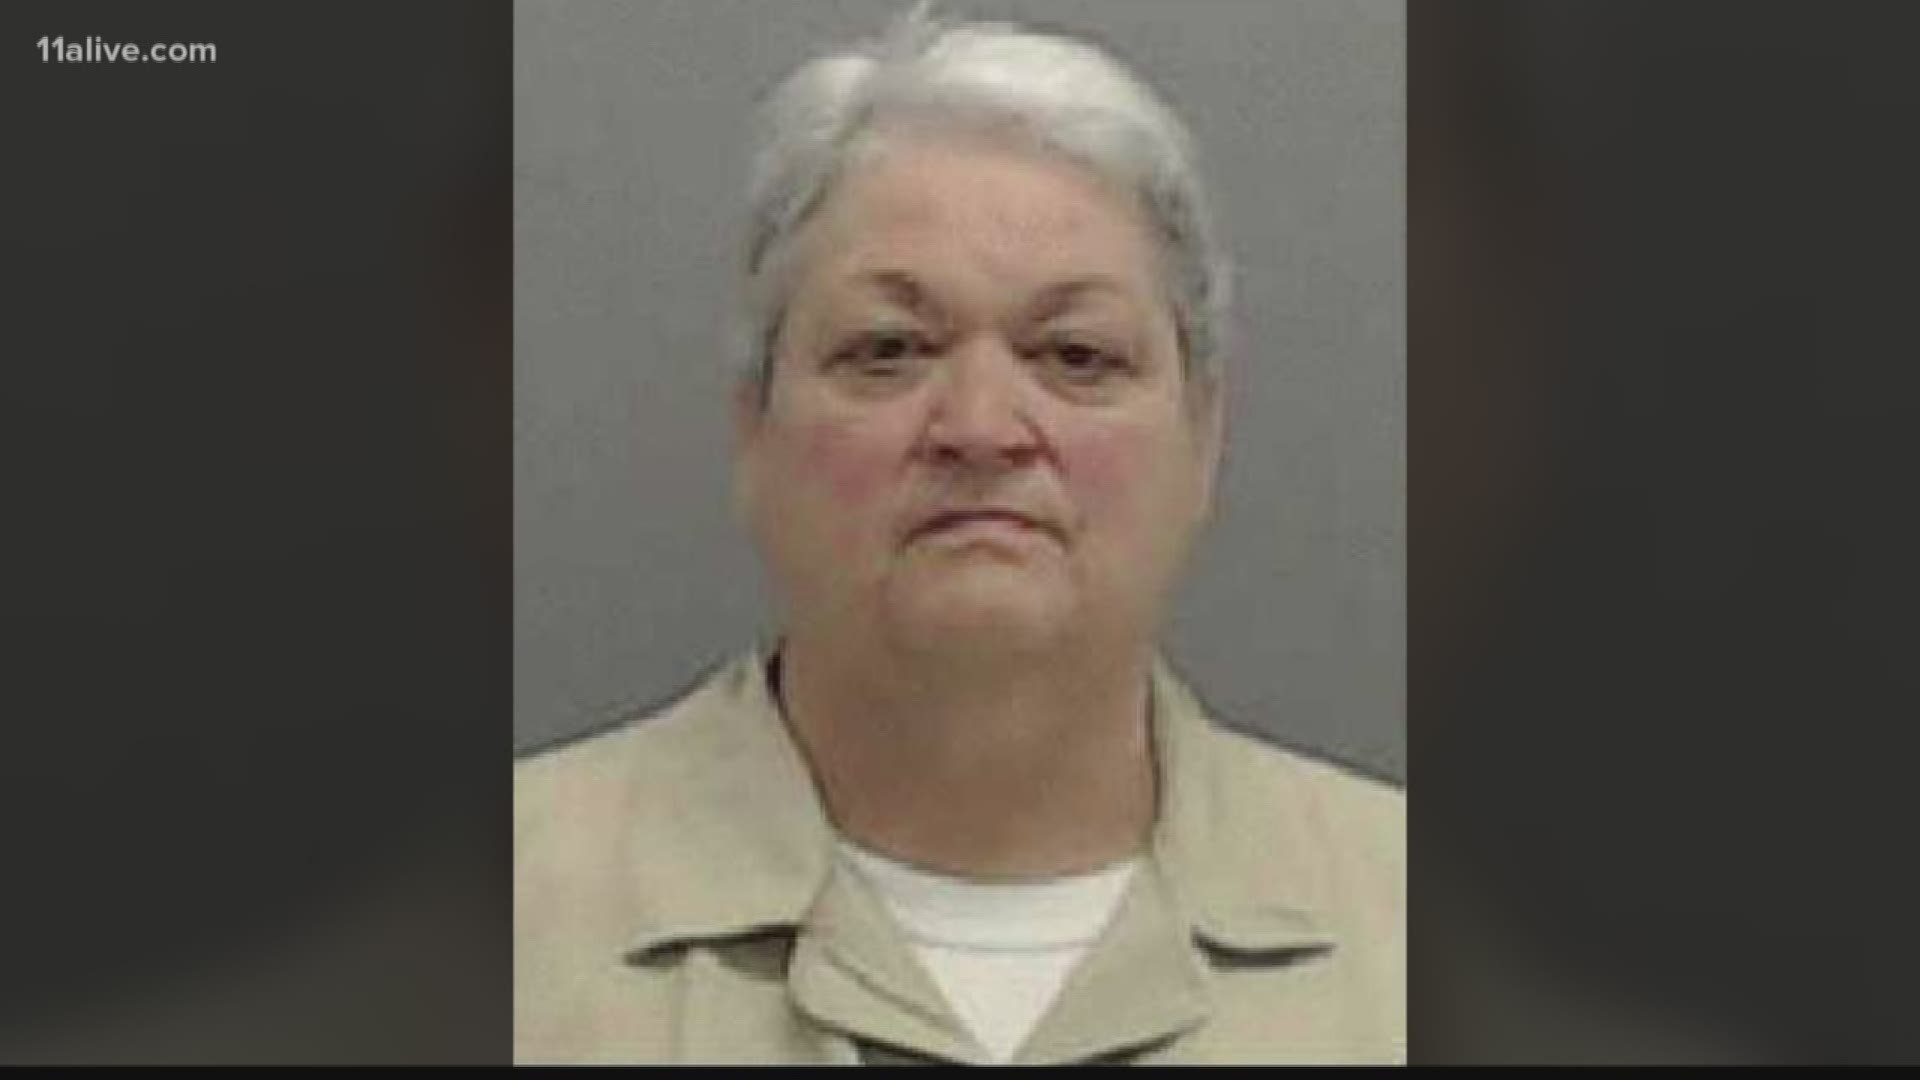 Martha Ann Johnson is serving a life sentence for the 1982 murder of her daughter, but has been tentatively granted parole.